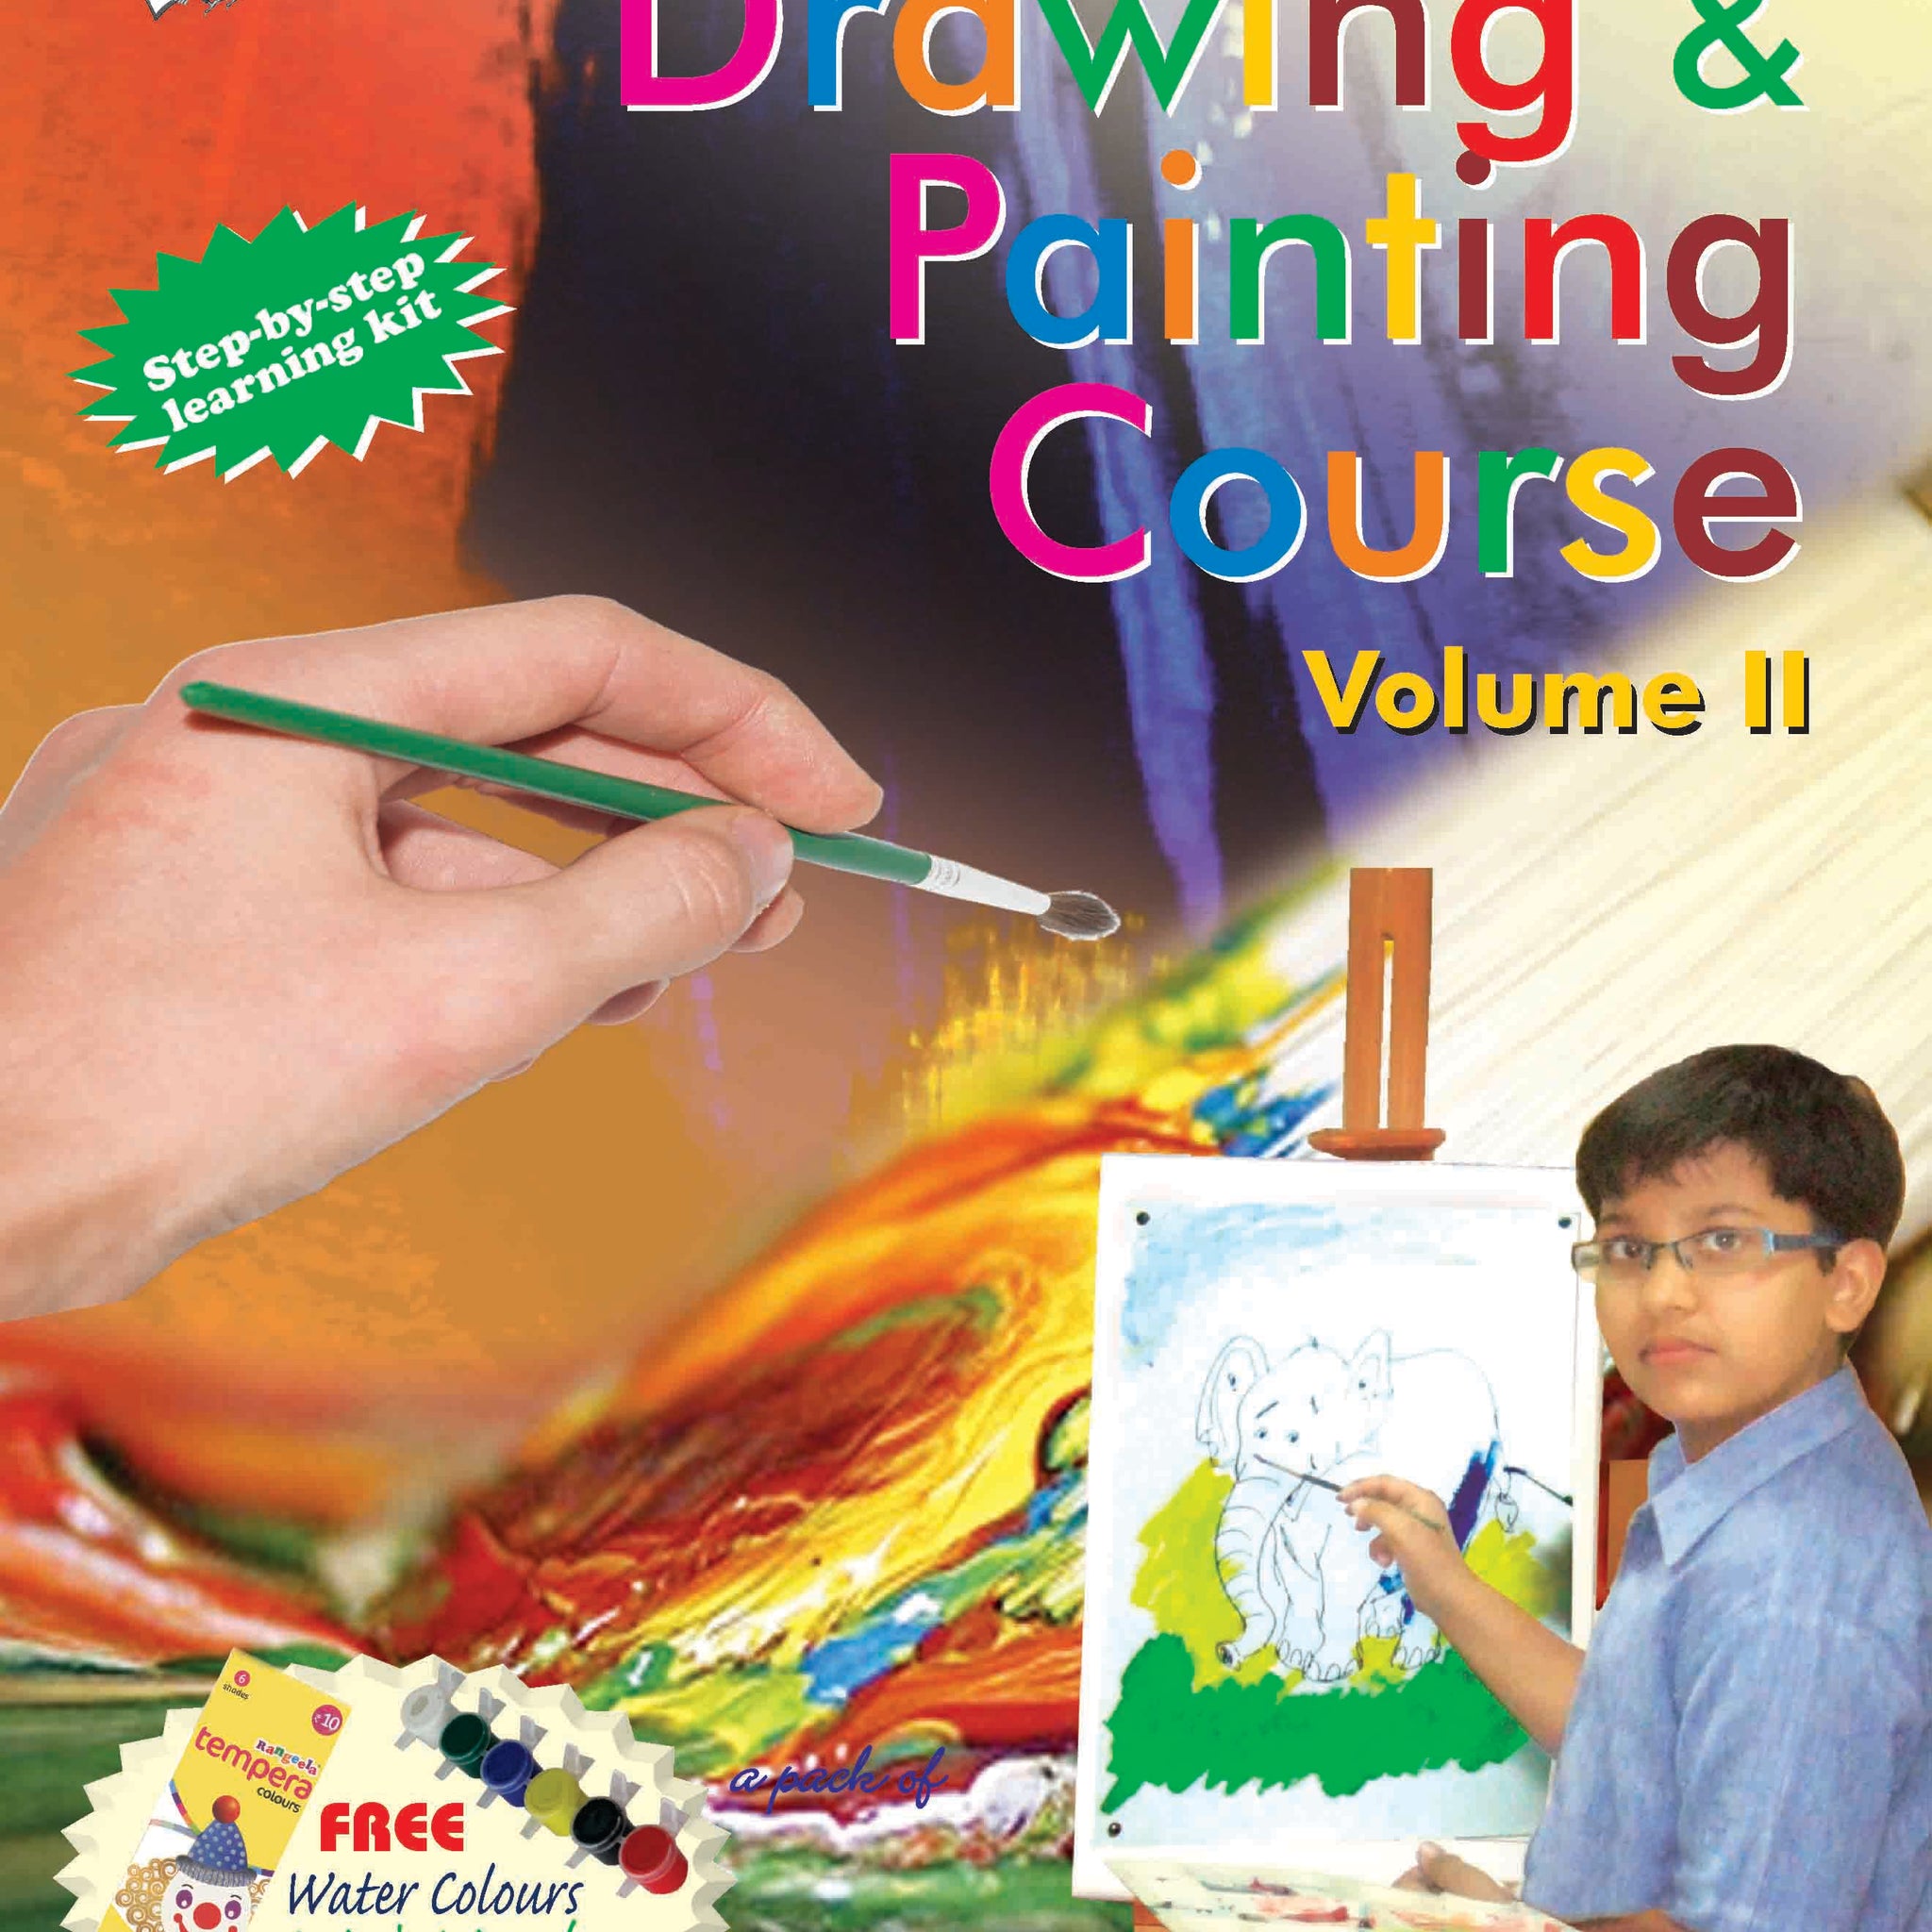 Drawing & Painting Course Volume - 2